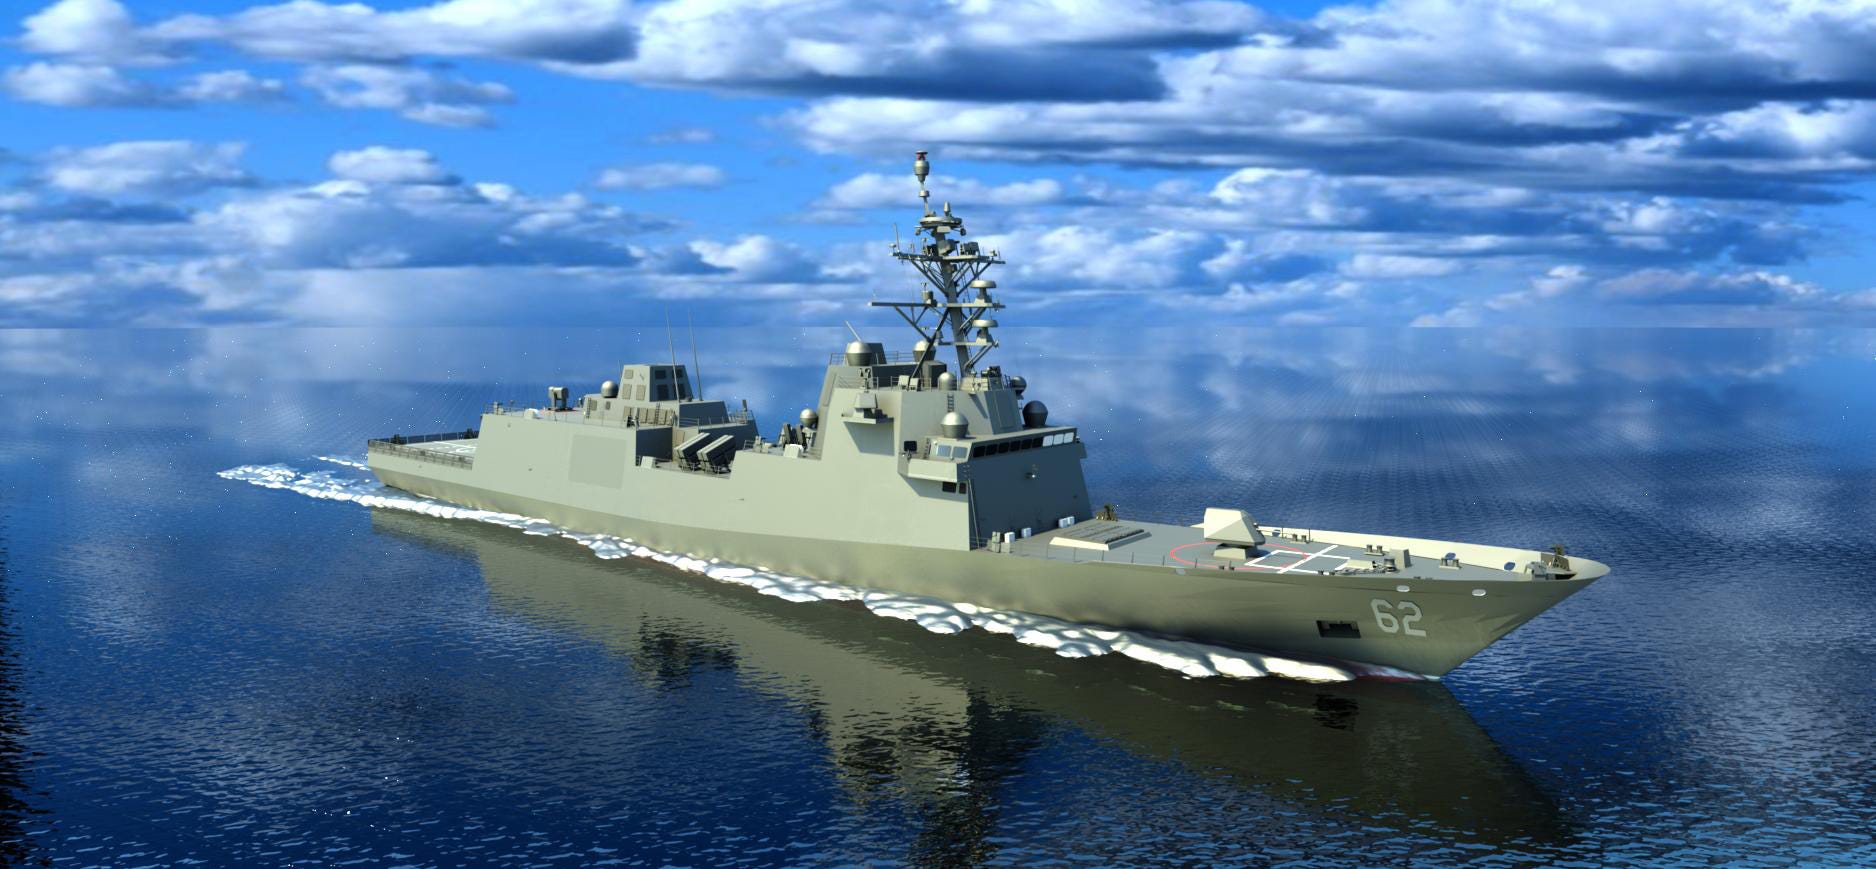 Can The U.S. Navy Finally Deliver a New Frigate to the Fleet?